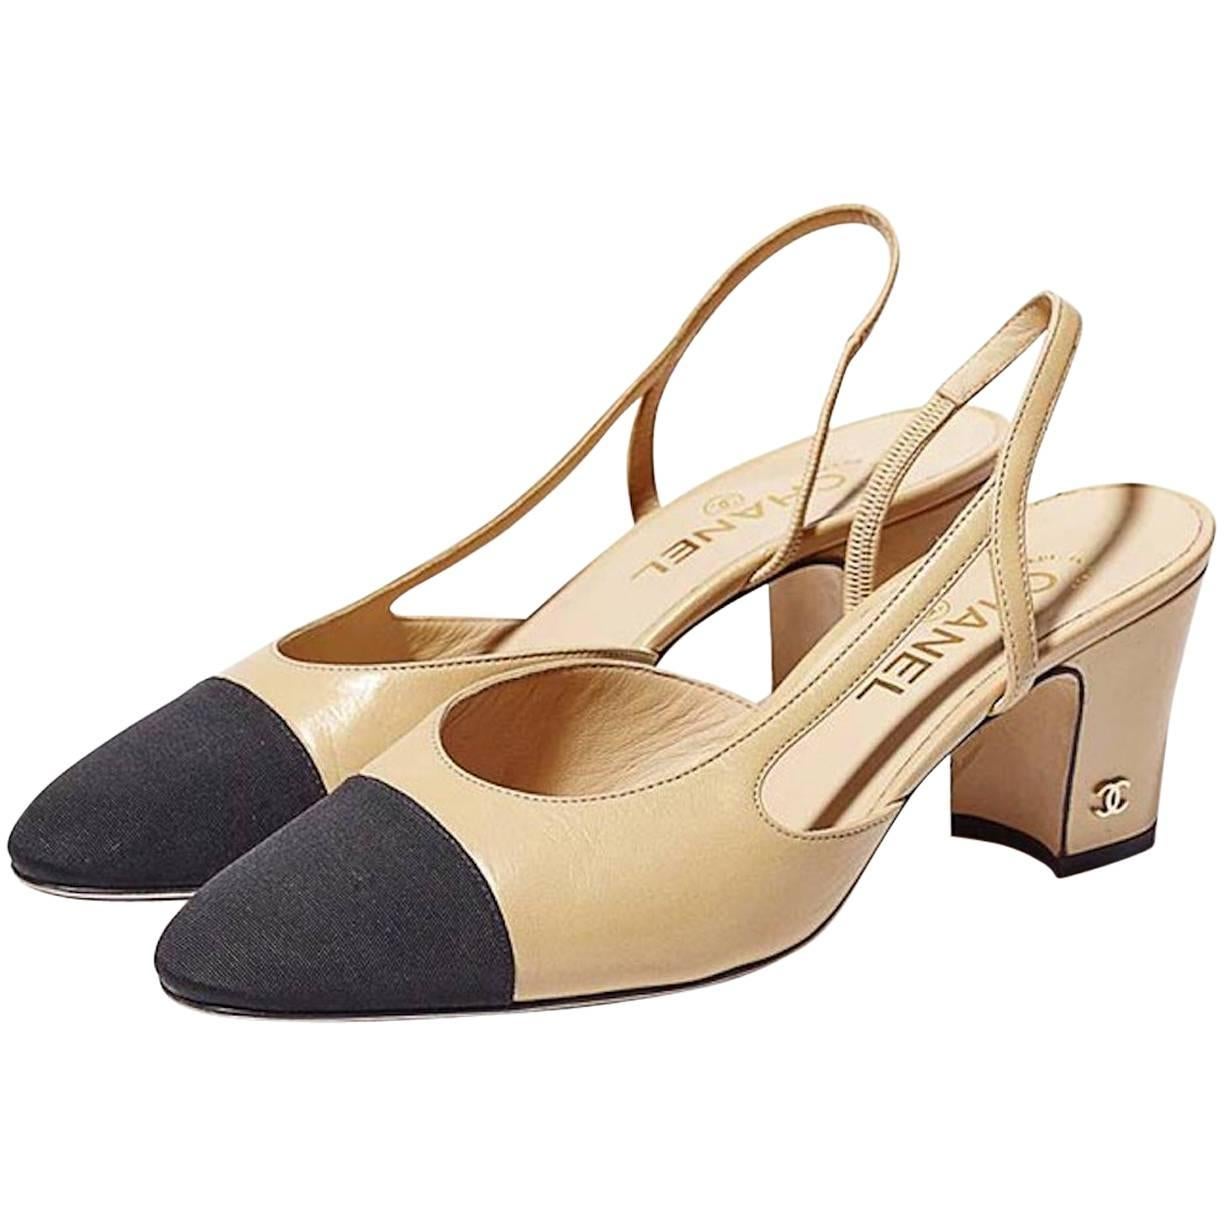 Chanel NEW & SOLD OUT Black Beige Tan Leather Cap Toe Slingback Heels in Box